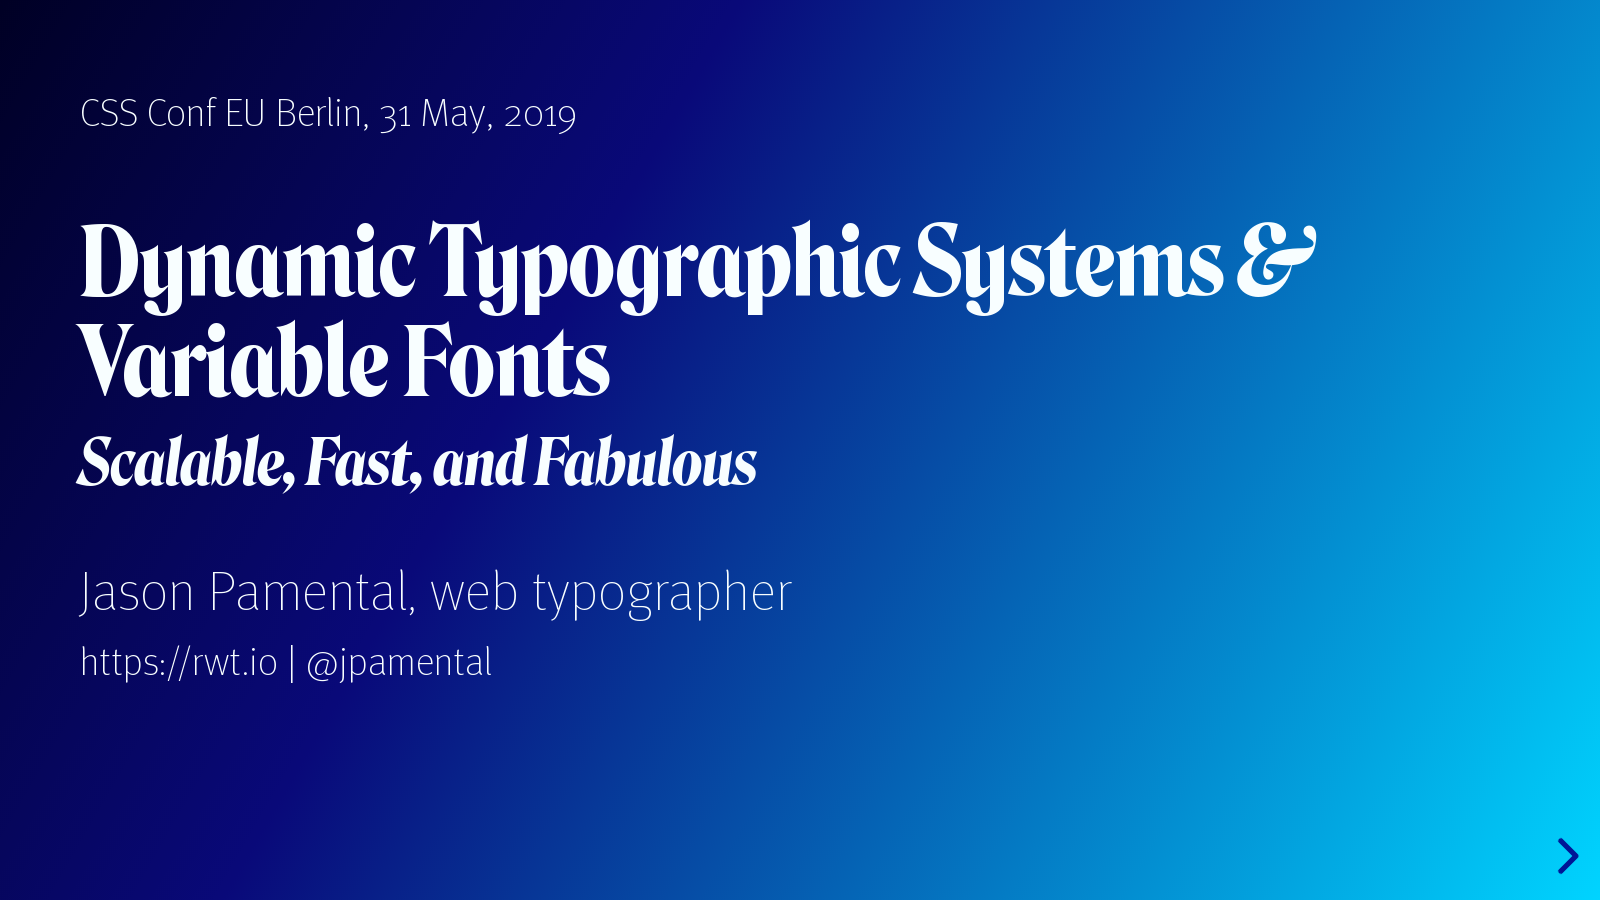 Dynamic Typography with Variable Fonts